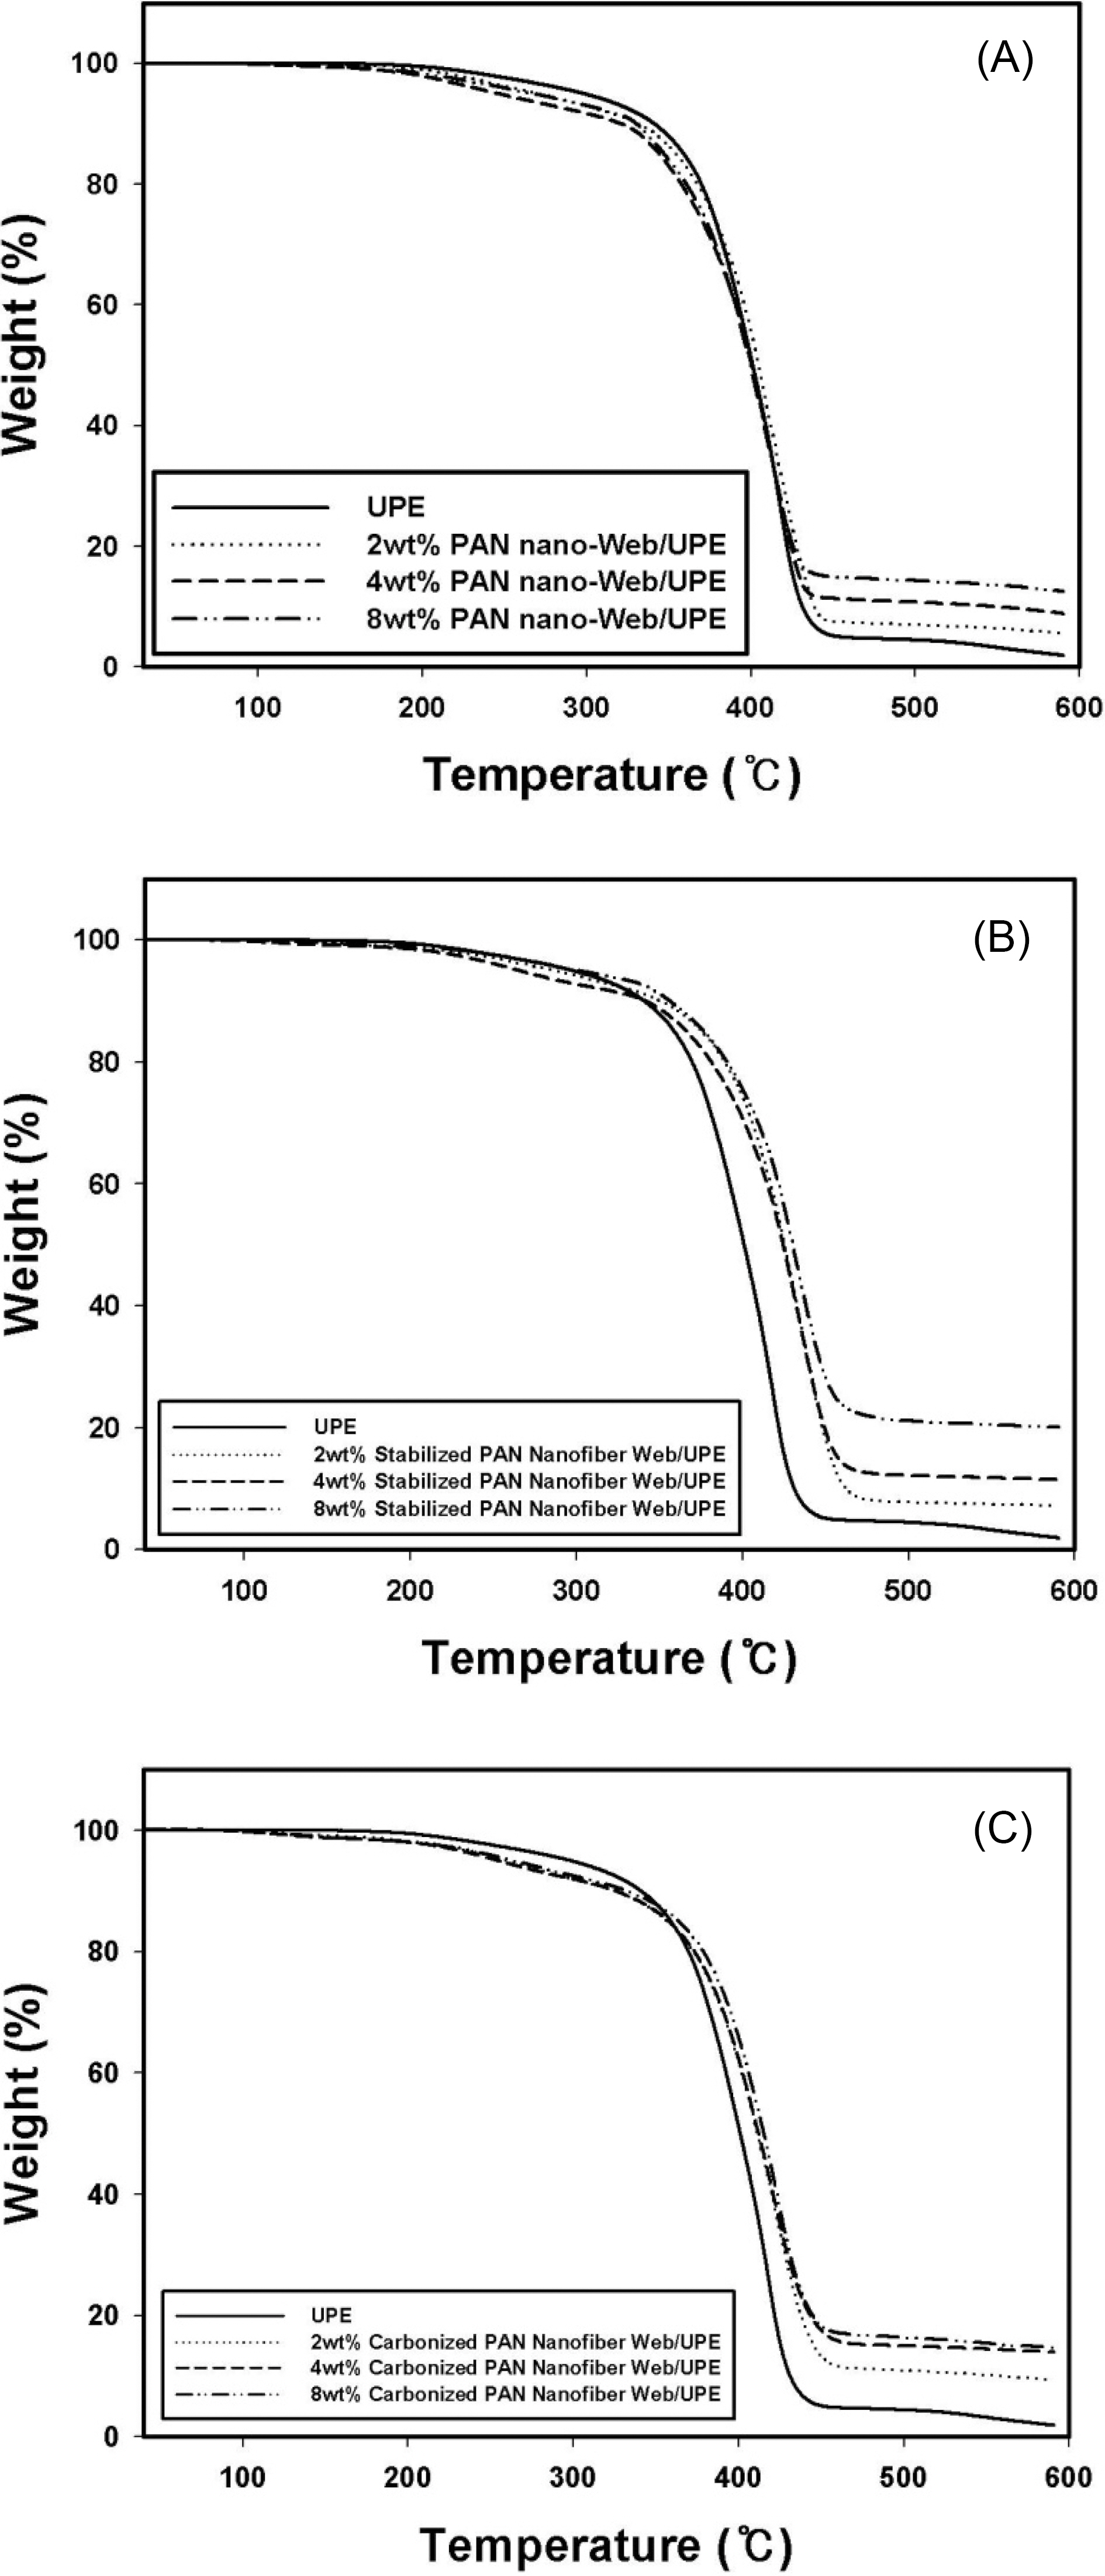 TGA curves showing the thermal stability of (A) PAN nanofiber web/UPE (B) stabilized PAN nanofiber web/UPE and (C) carbonized PAN nanofiber web/UPE composites with different web contents.